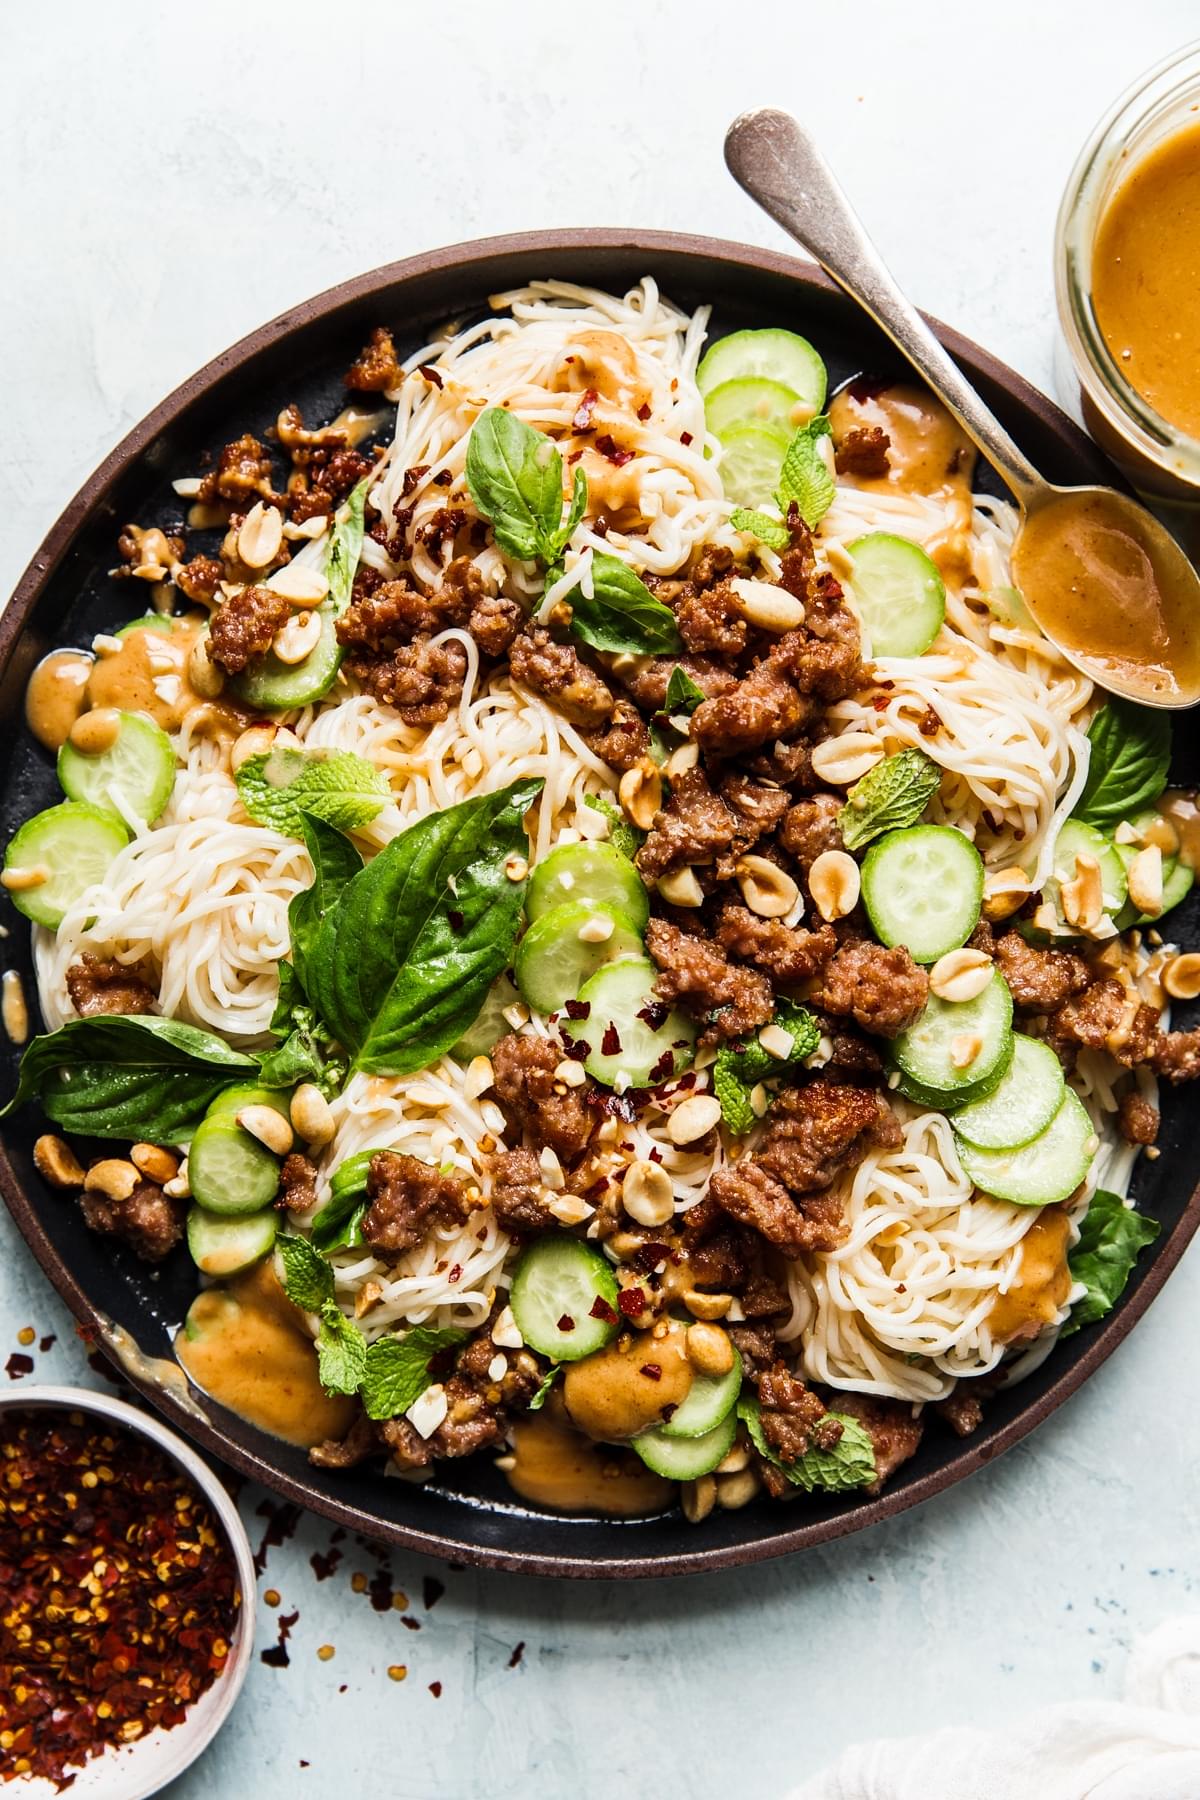 Cold Thai noodle salad topped with peanut dressing, crushed peanuts, ground pork, cucumbers, basil and mint